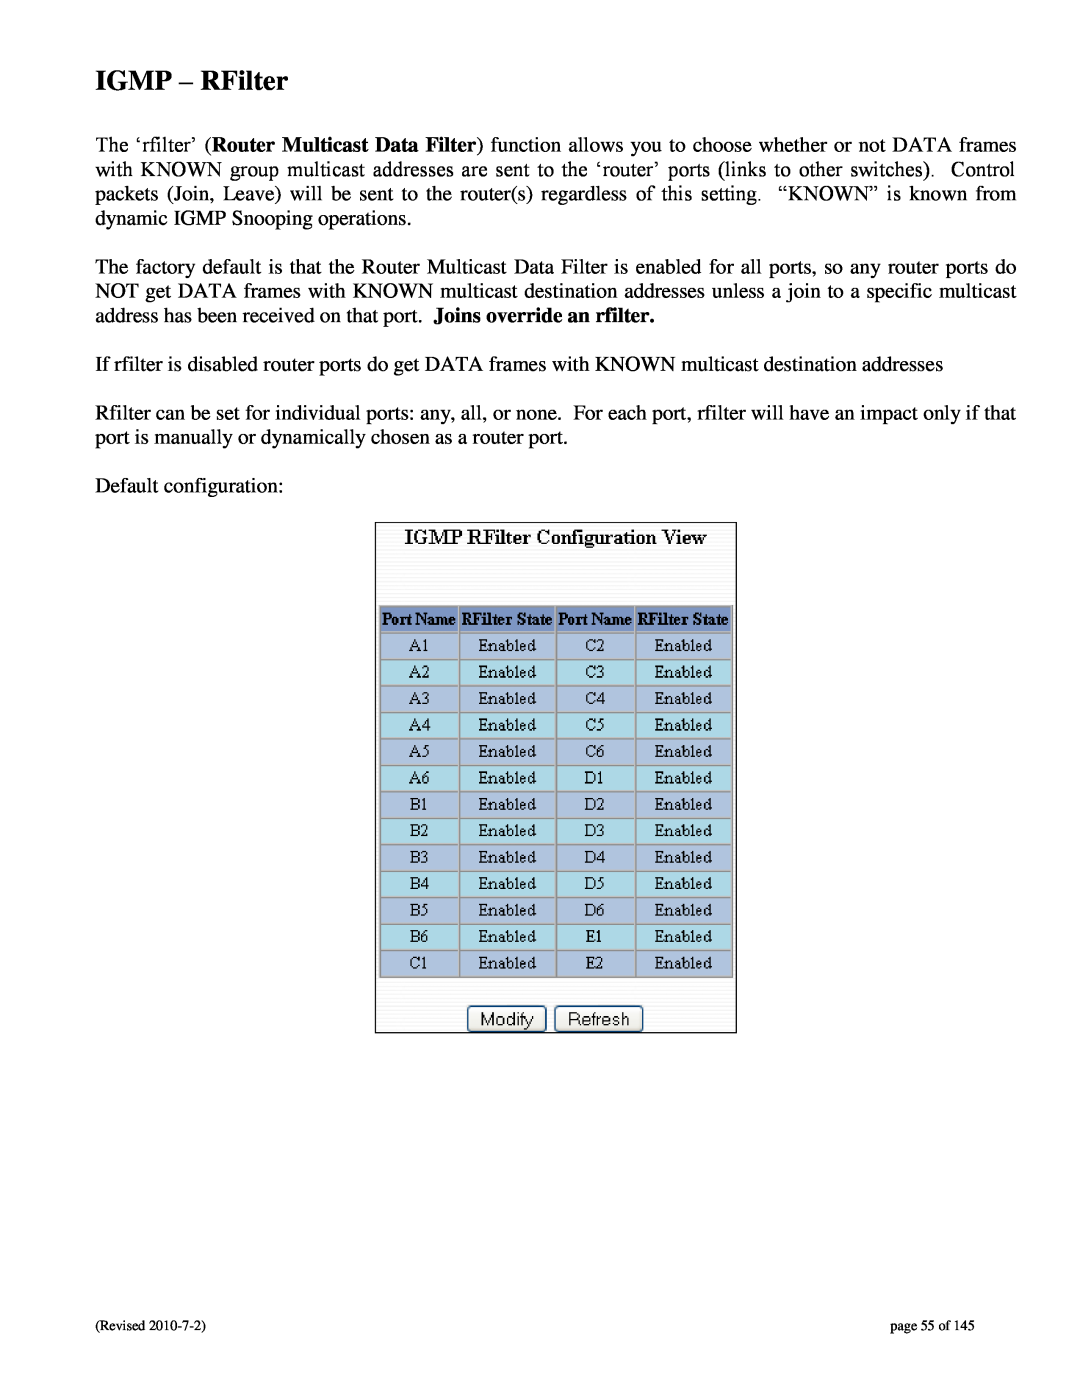 N-Tron 9000 user manual IGMP - RFilter 